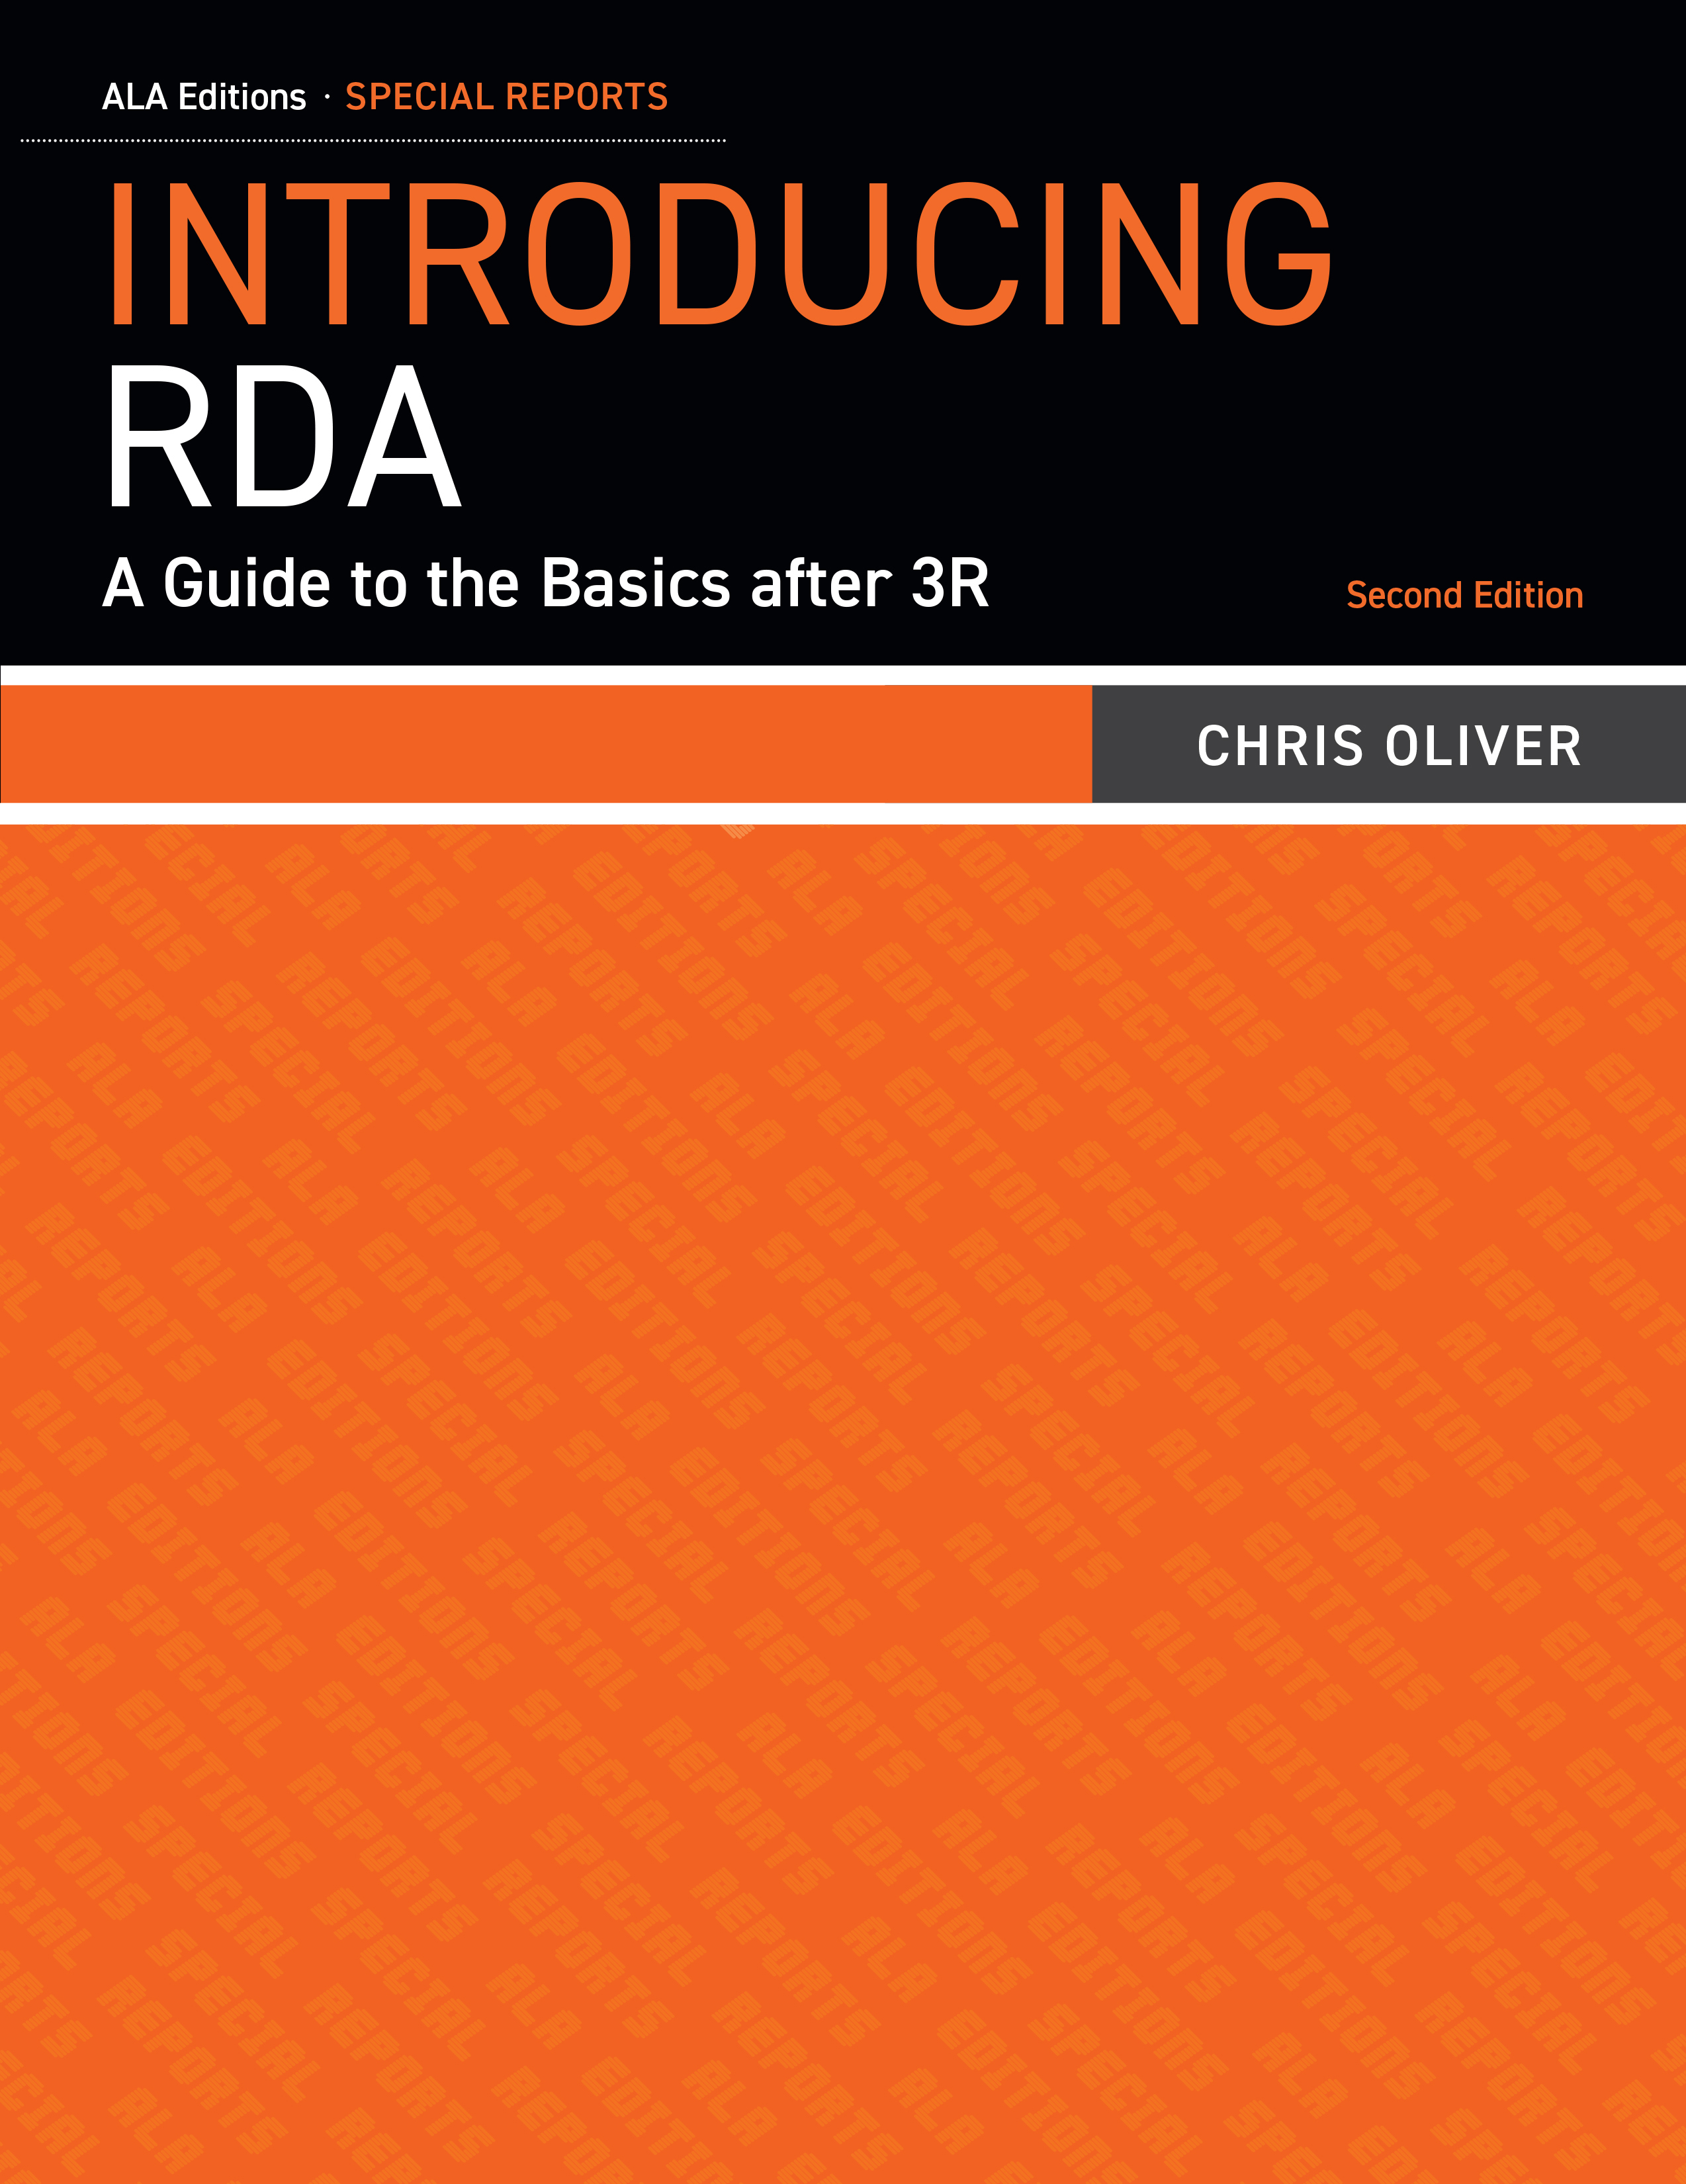 book cover for Introducing RDA: A Guide to the Basics after 3R, Second Edition